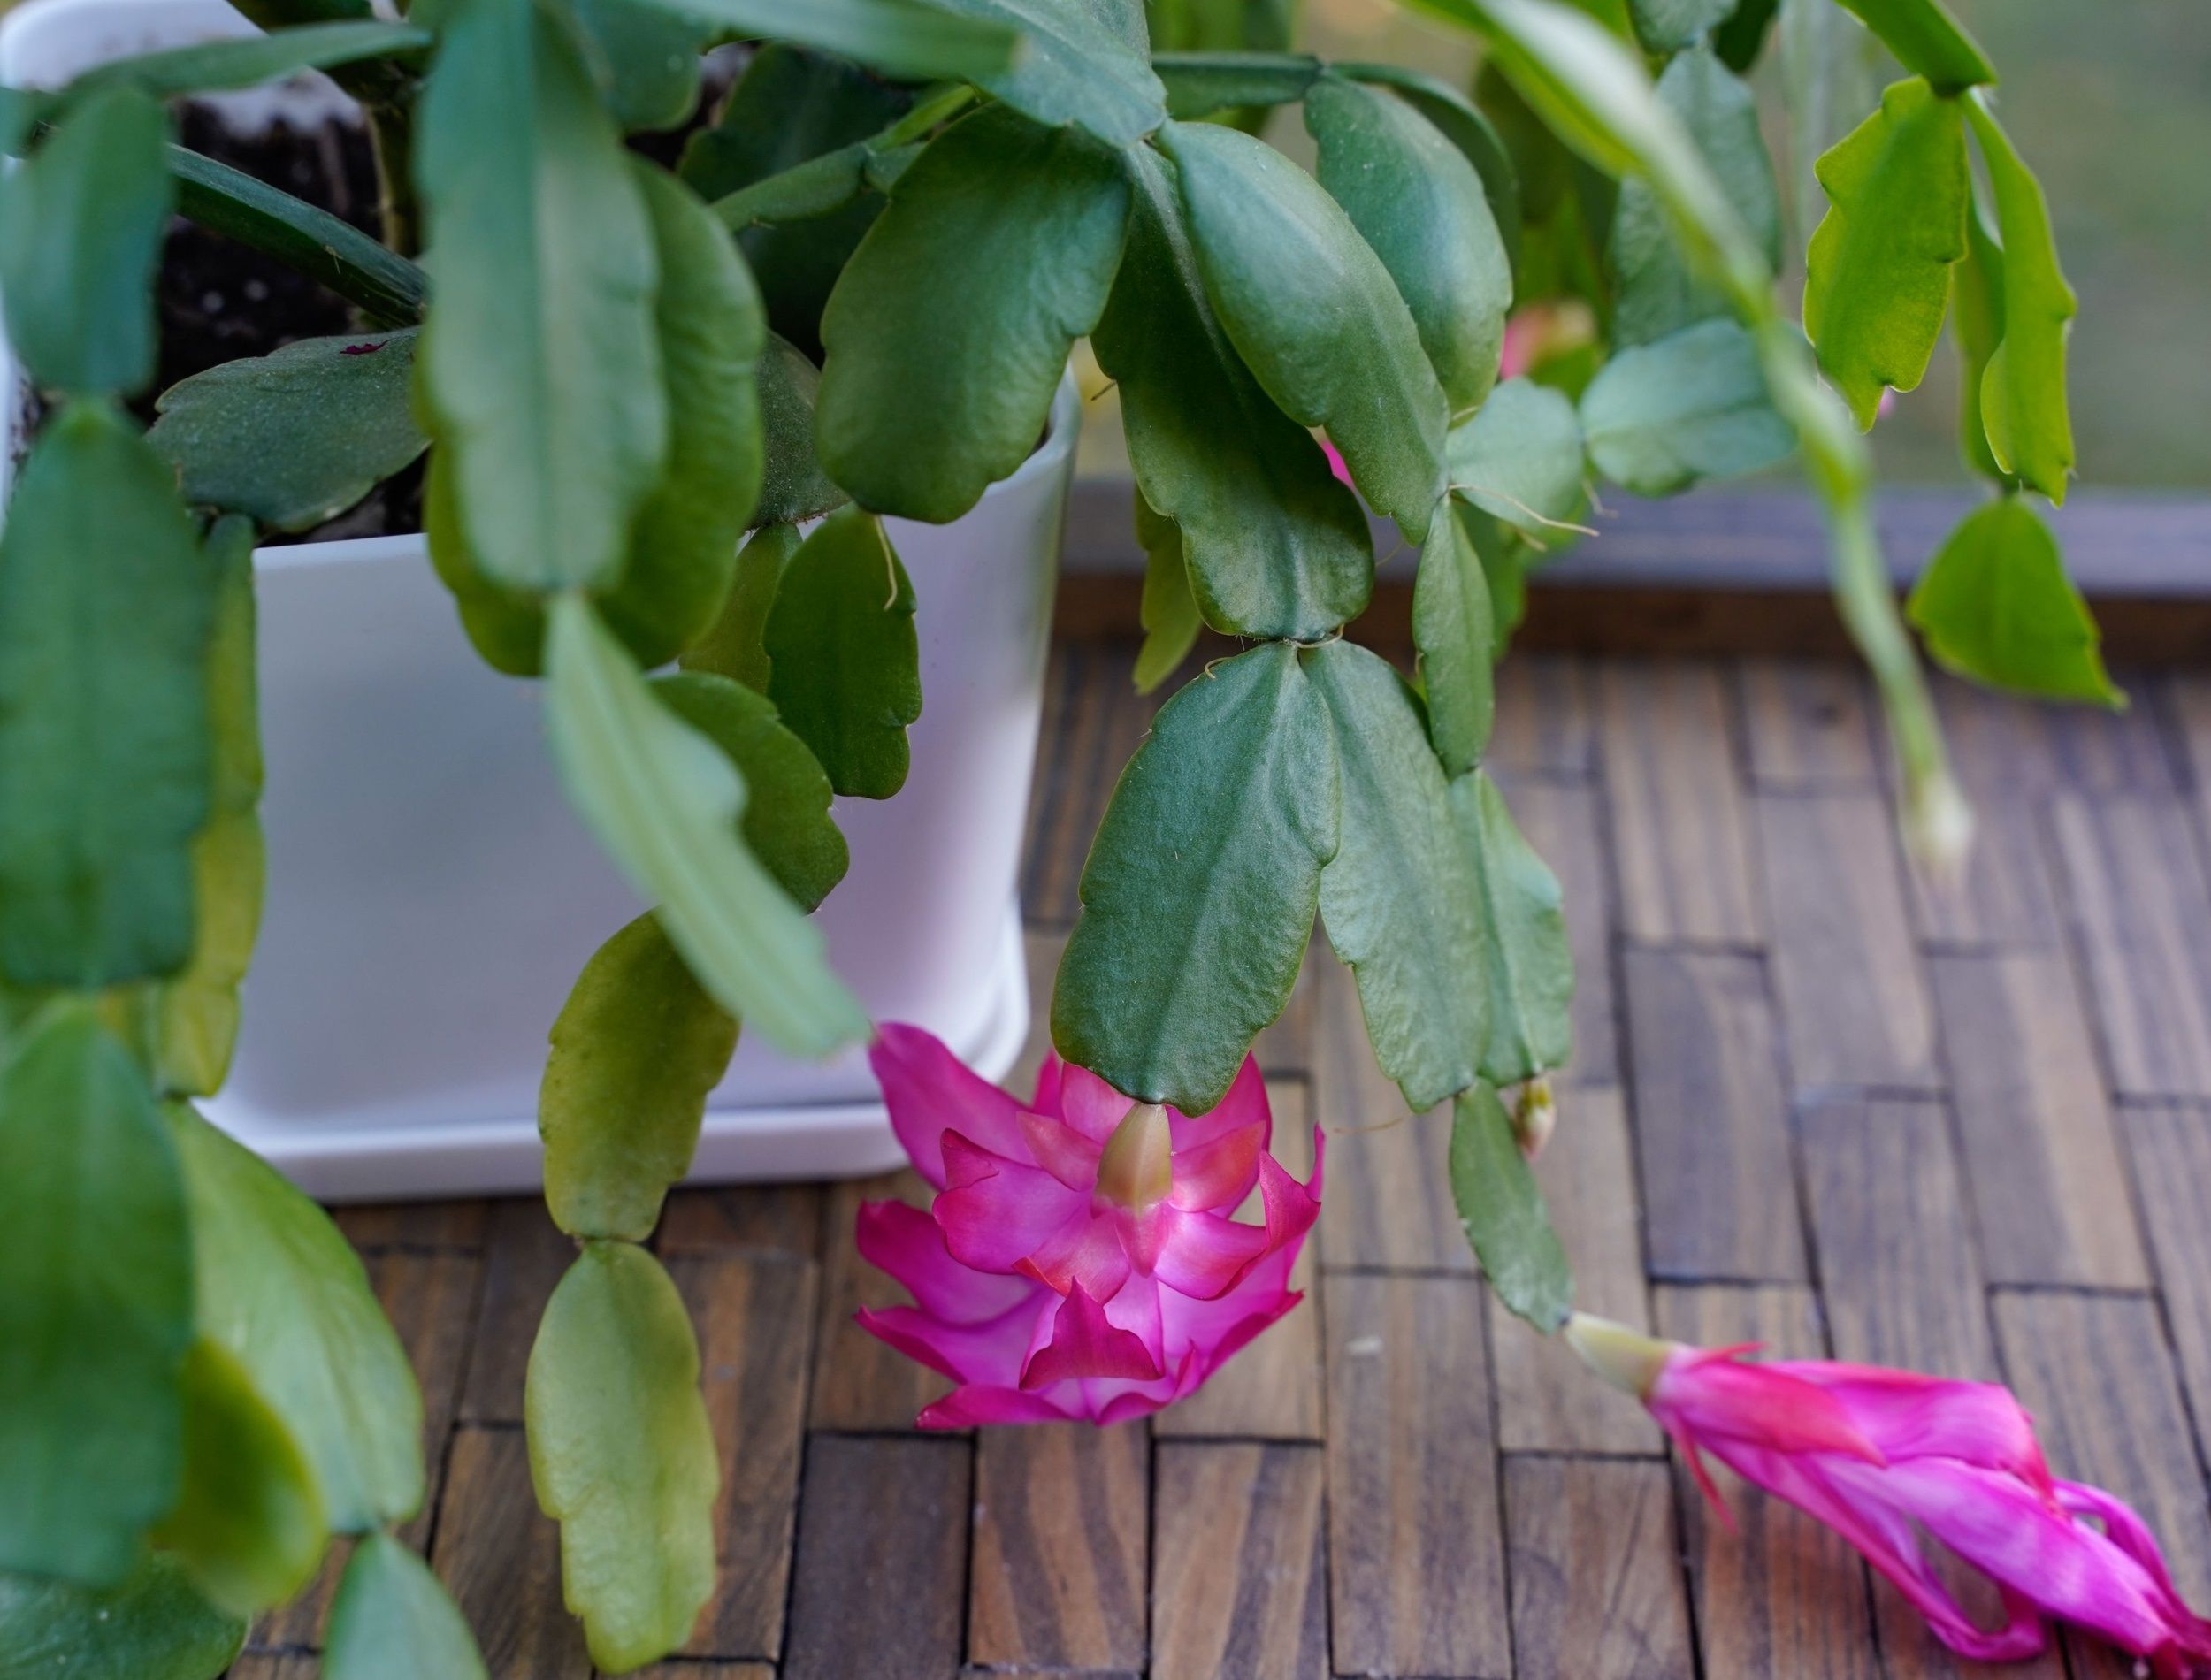 Flowering Christmas cactus. Bright pink flowers. Young plant.